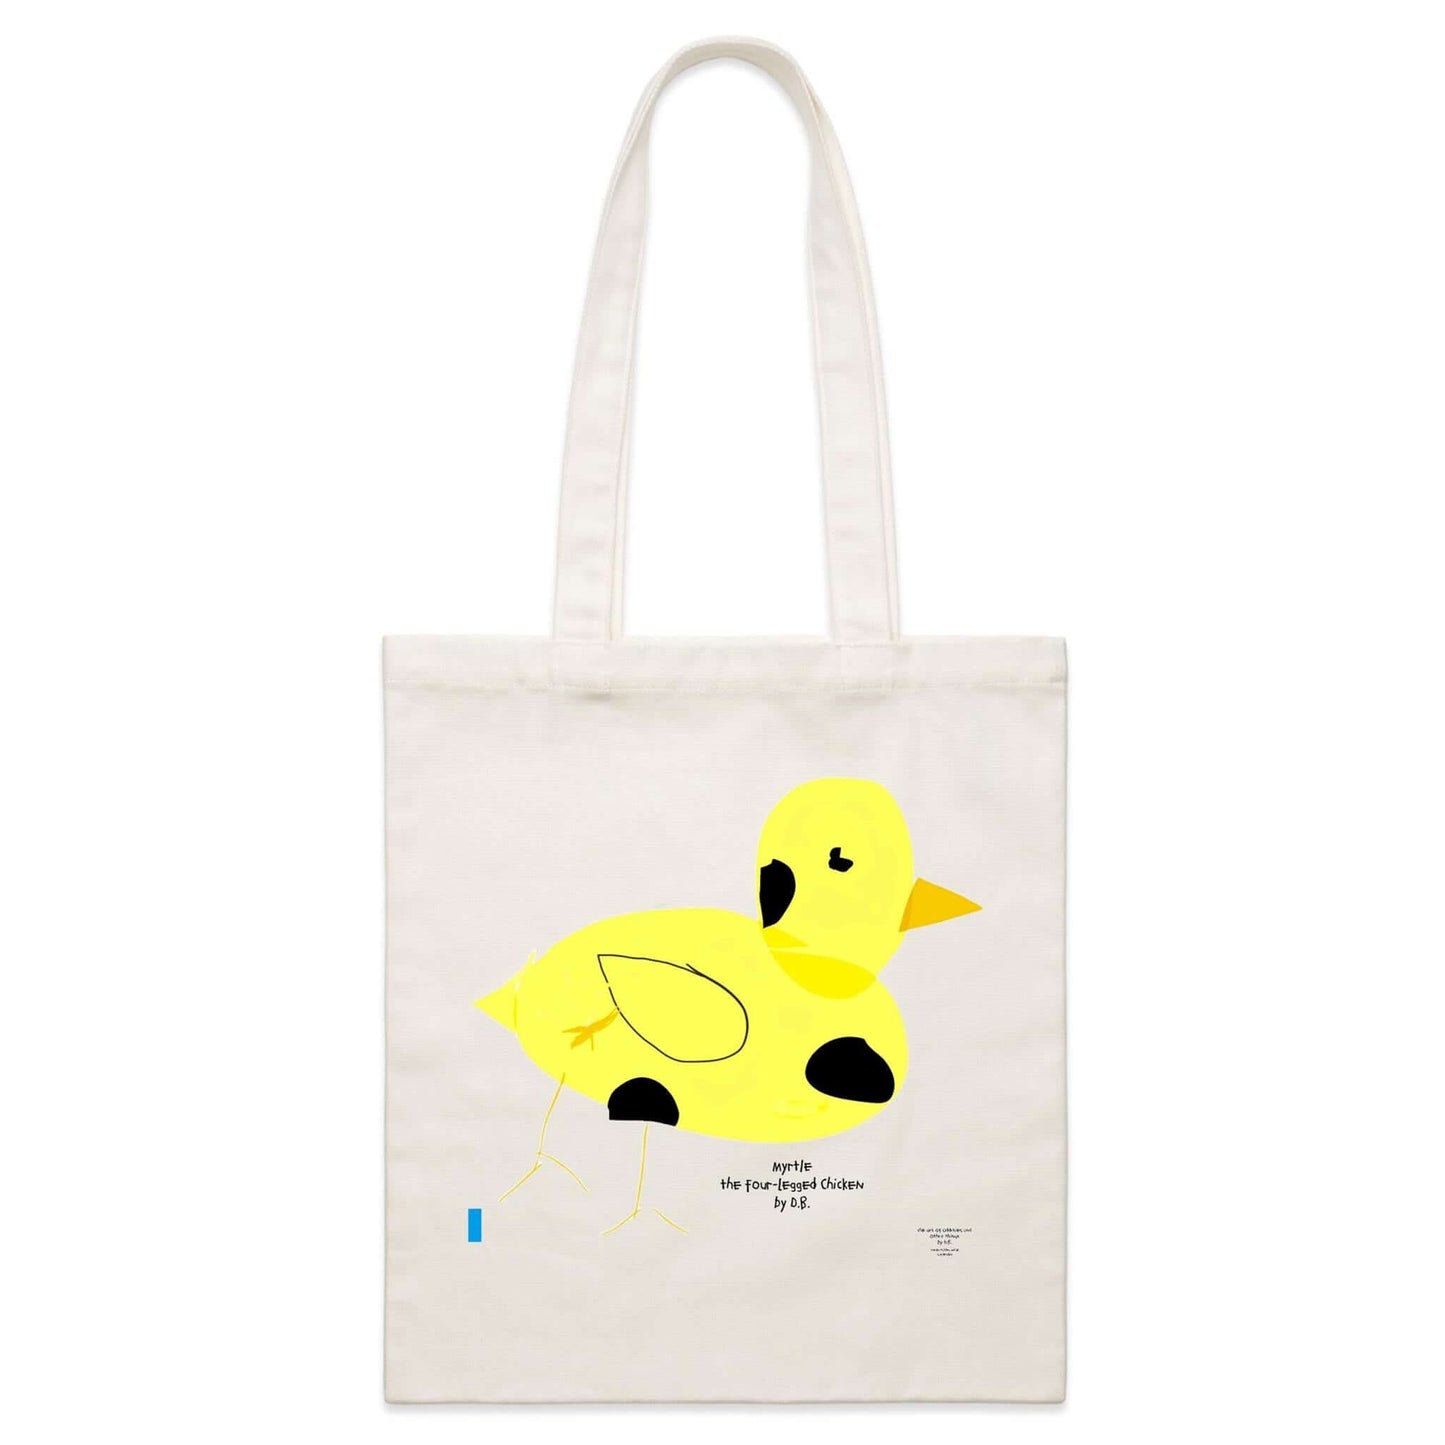 Canvas Tote Bag with Myrtle the Four-Legged Chicken by D.B. print